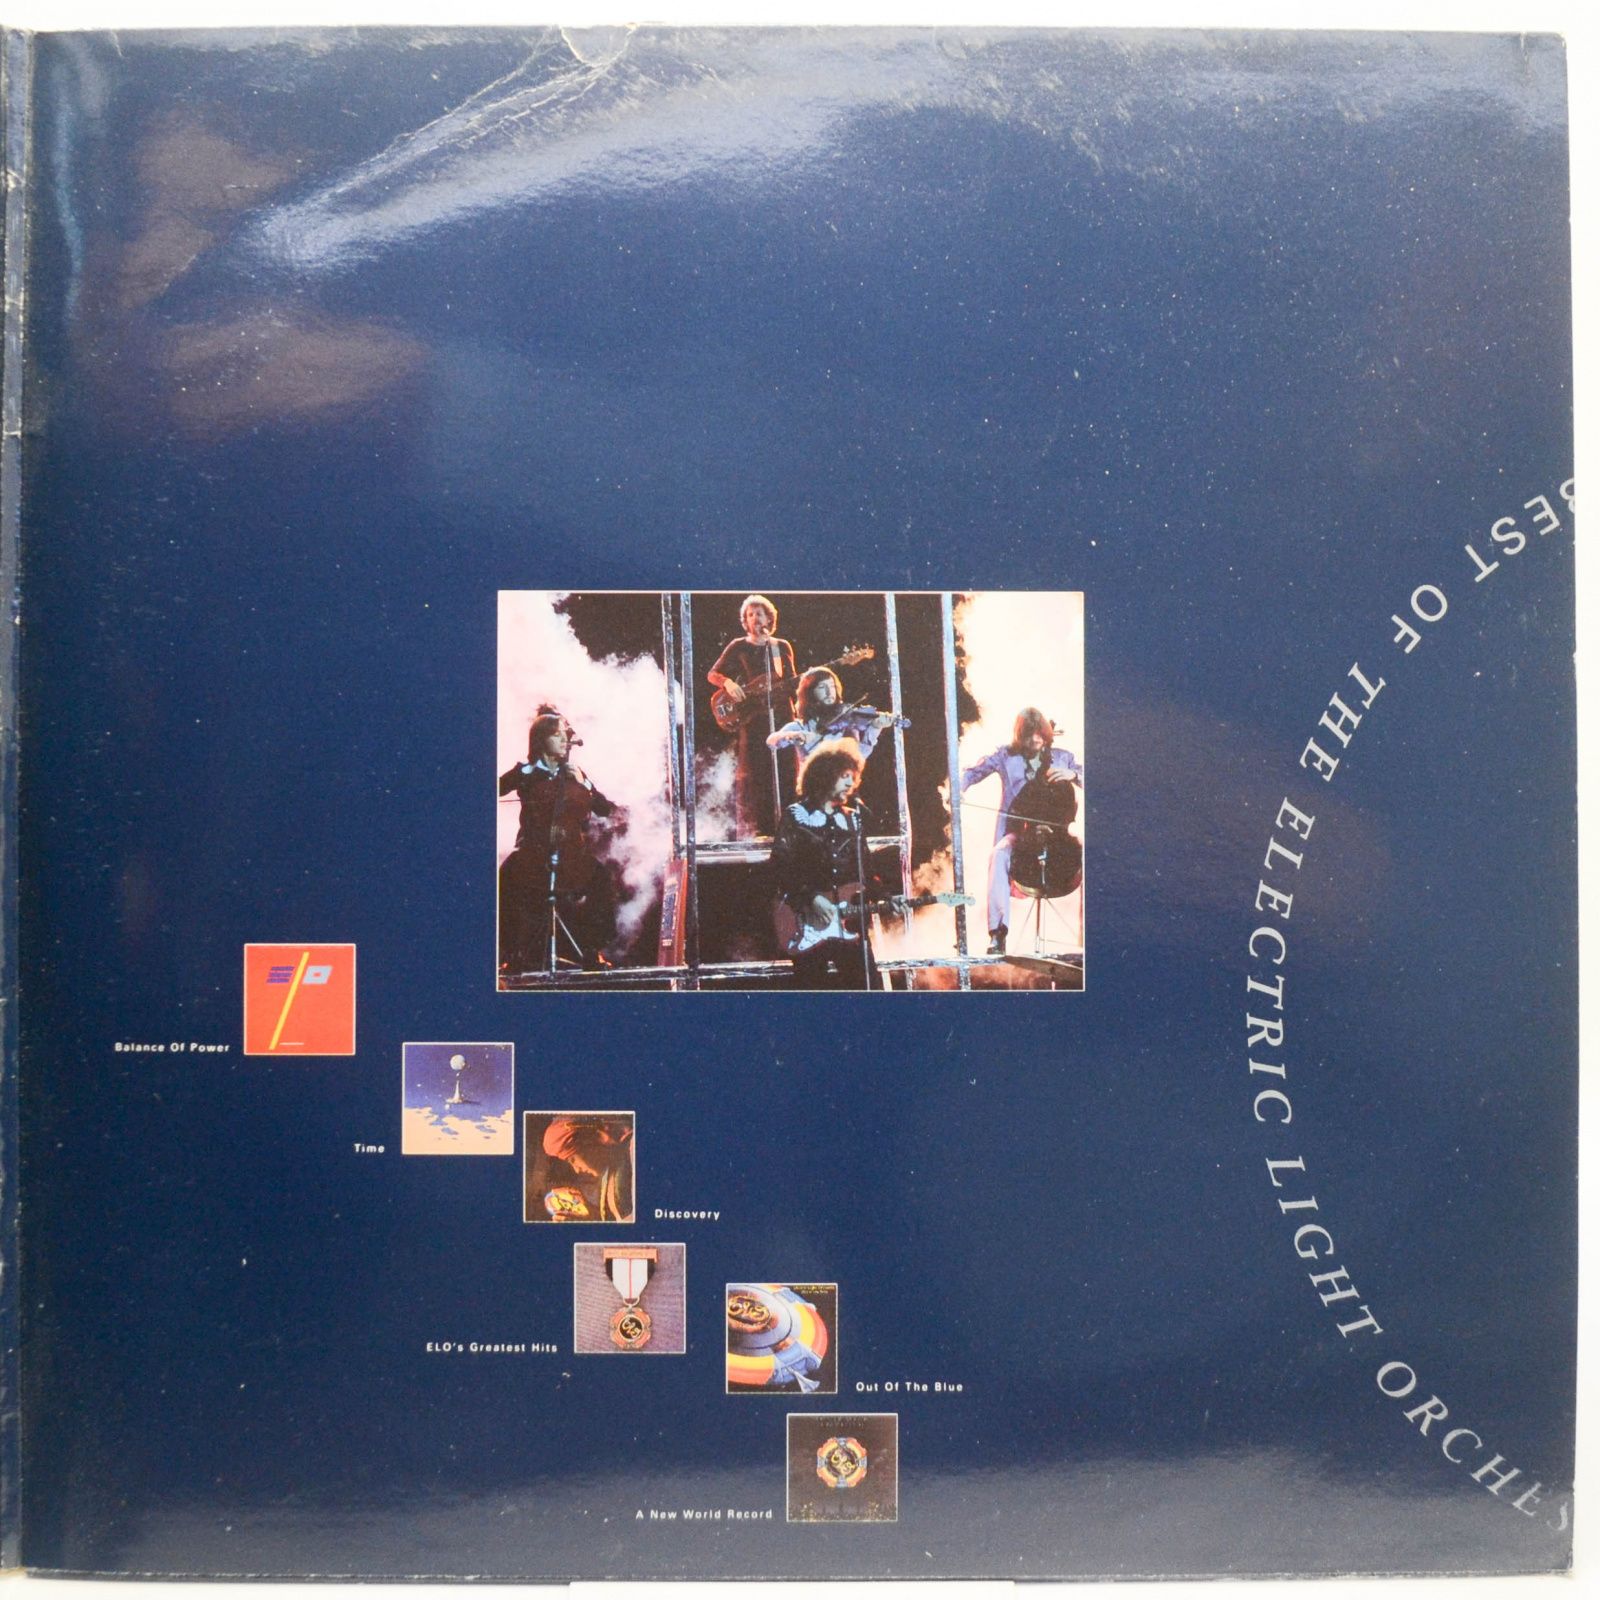 Electric Light Orchestra — The Very Best Of The Electric Light Orchestra (2LP, UK), 1989